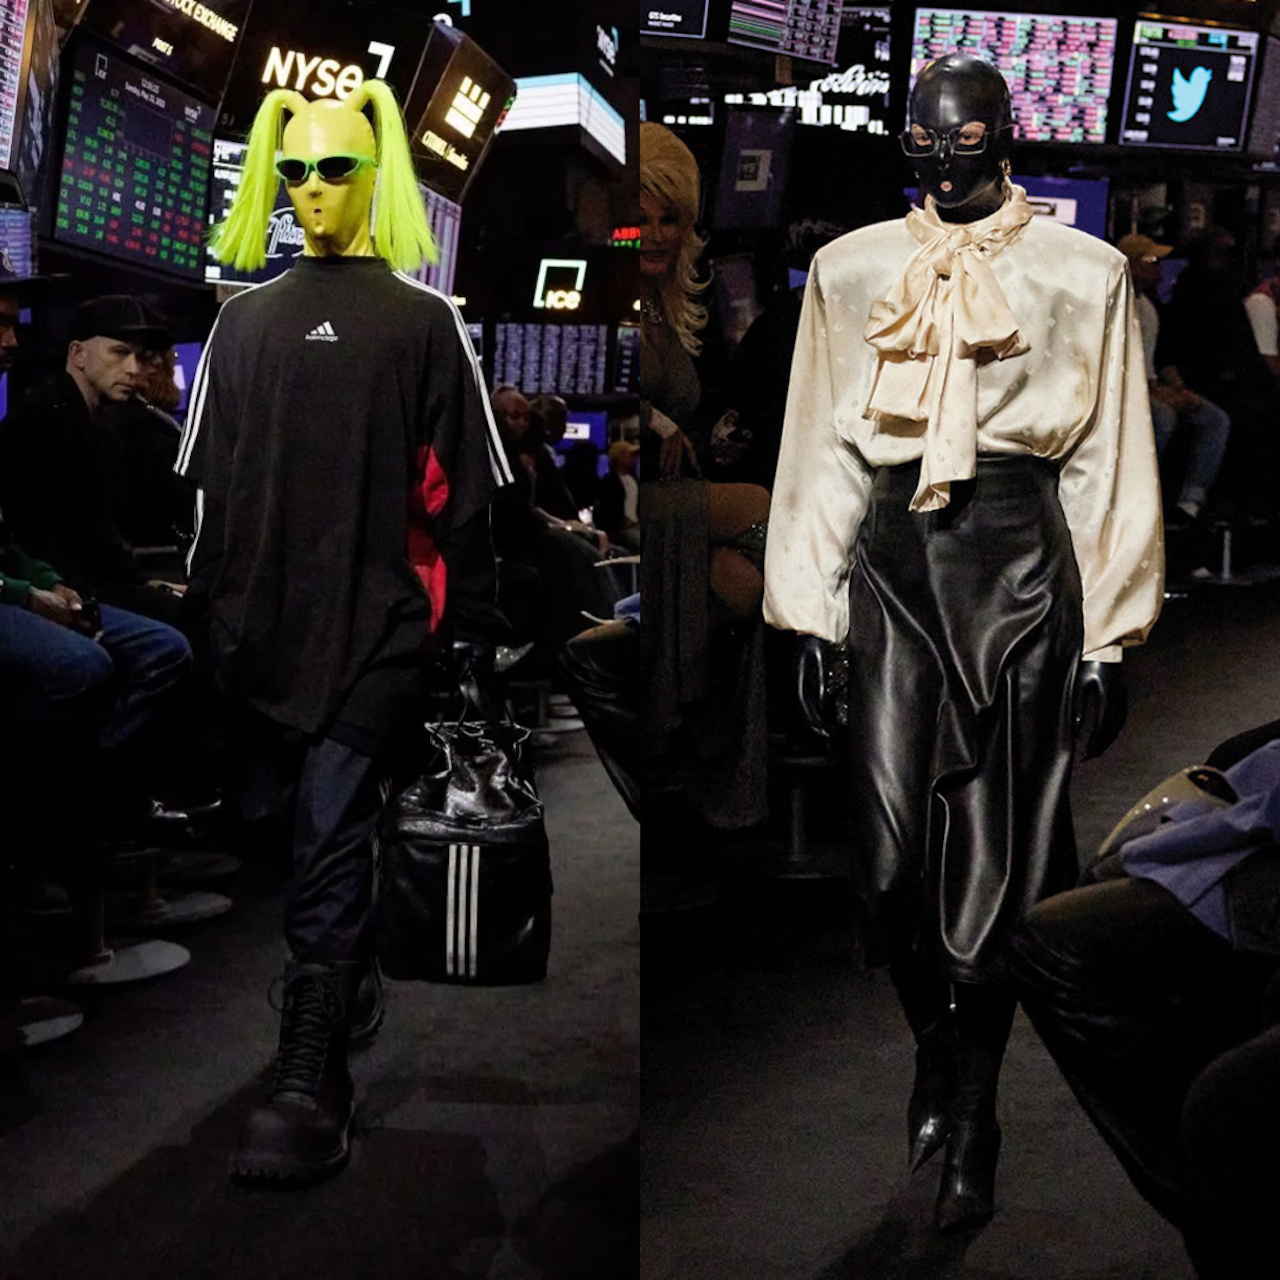 'It's Giving Robbery' Balenciaga's New Fashions Have in Stitches